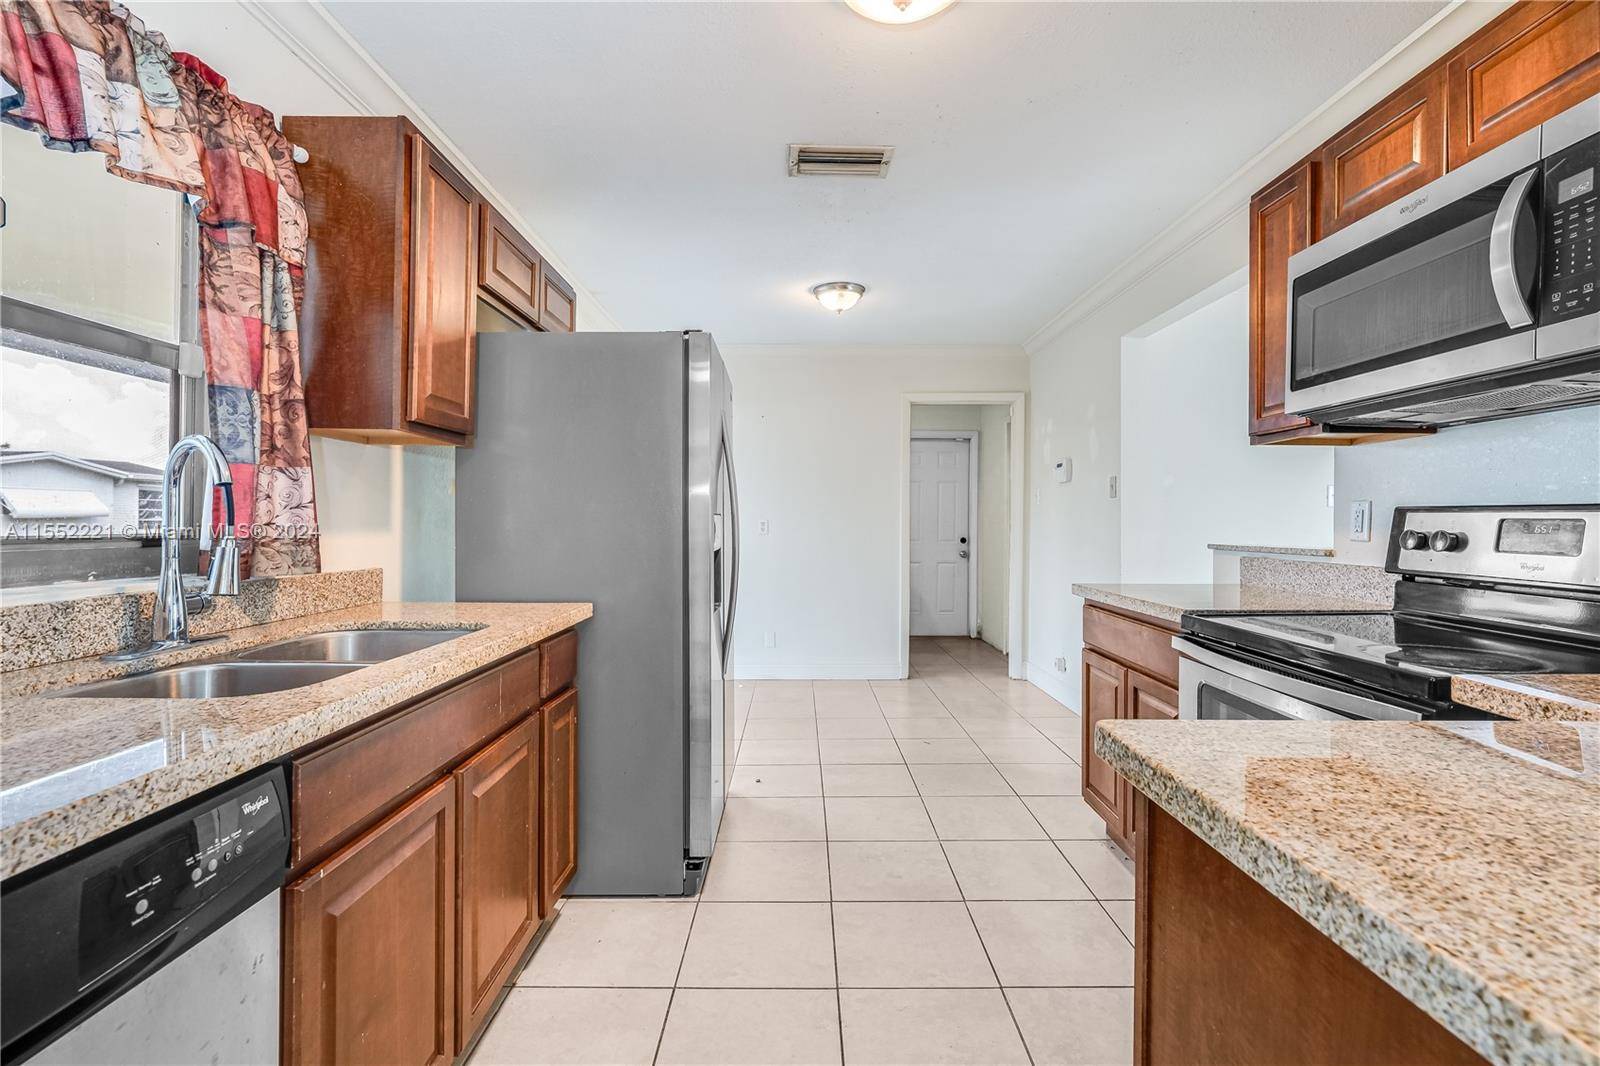 This beautiful well maintained single family home is move in ready 2 bedrooms 2 bathrooms, and open living area in addition to a spacious Florida Room.